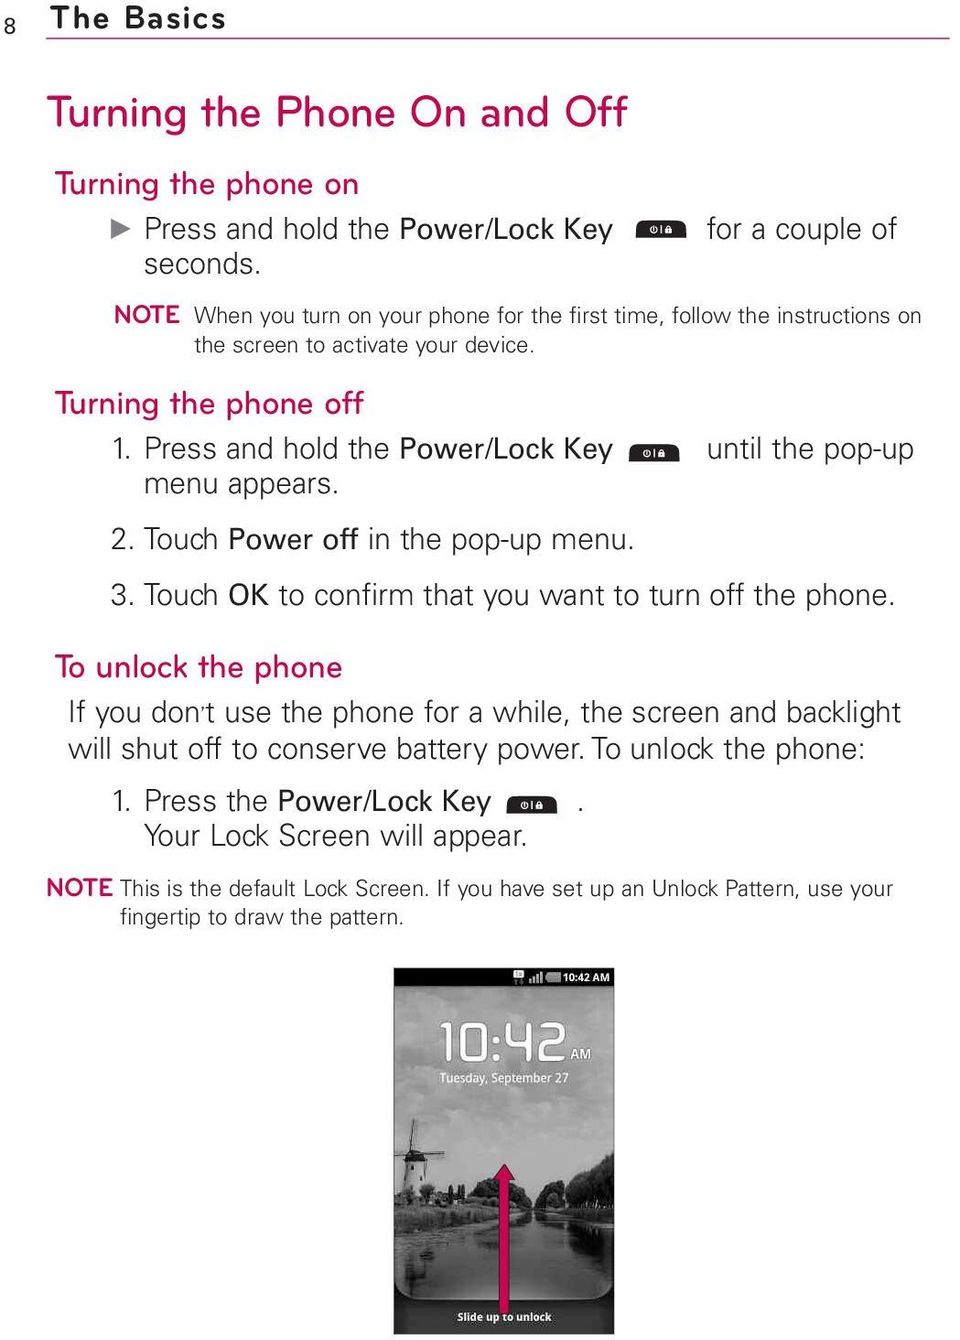 Press and hold the Power/Lock Key until the pop-up menu appears. 2. Touch Power off in the pop-up menu. 3. Touch OK to confirm that you want to turn off the phone.